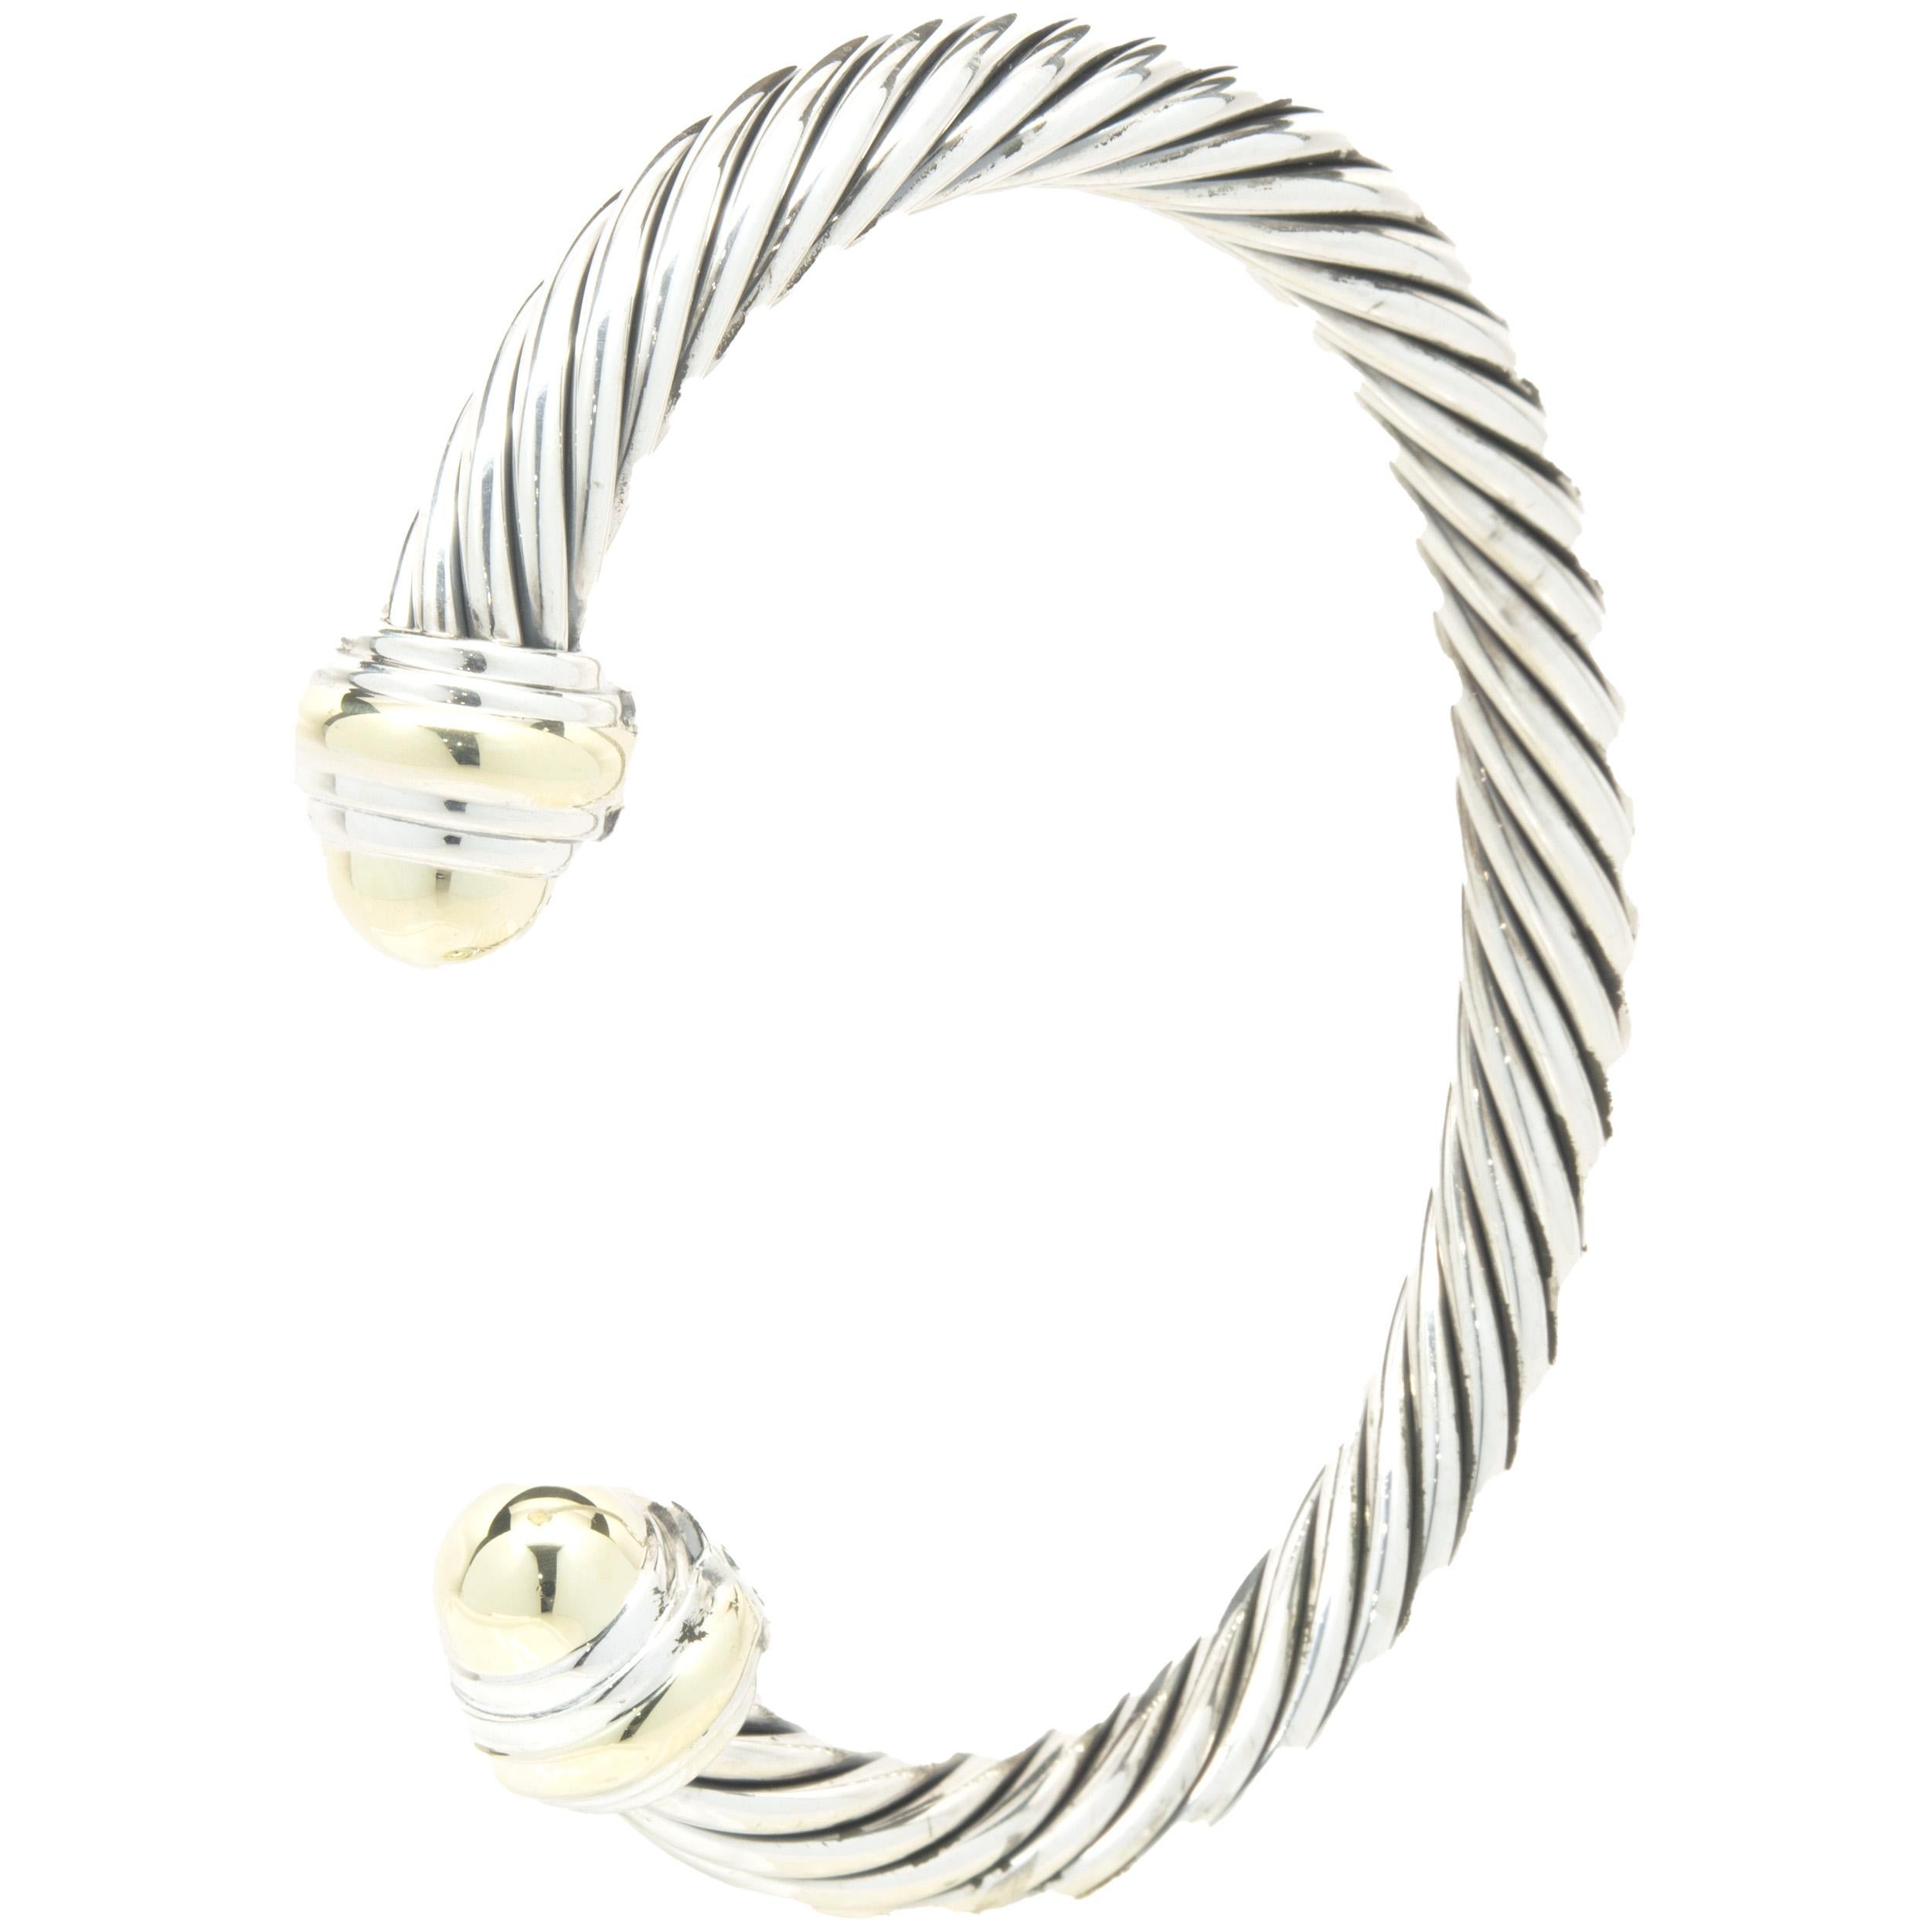 Designer: David Yurman
Material: sterling silver & 14k yellow gold
Dimensions: bracelet will fit a 7-inch wrist

Guaranteed authentic by seller